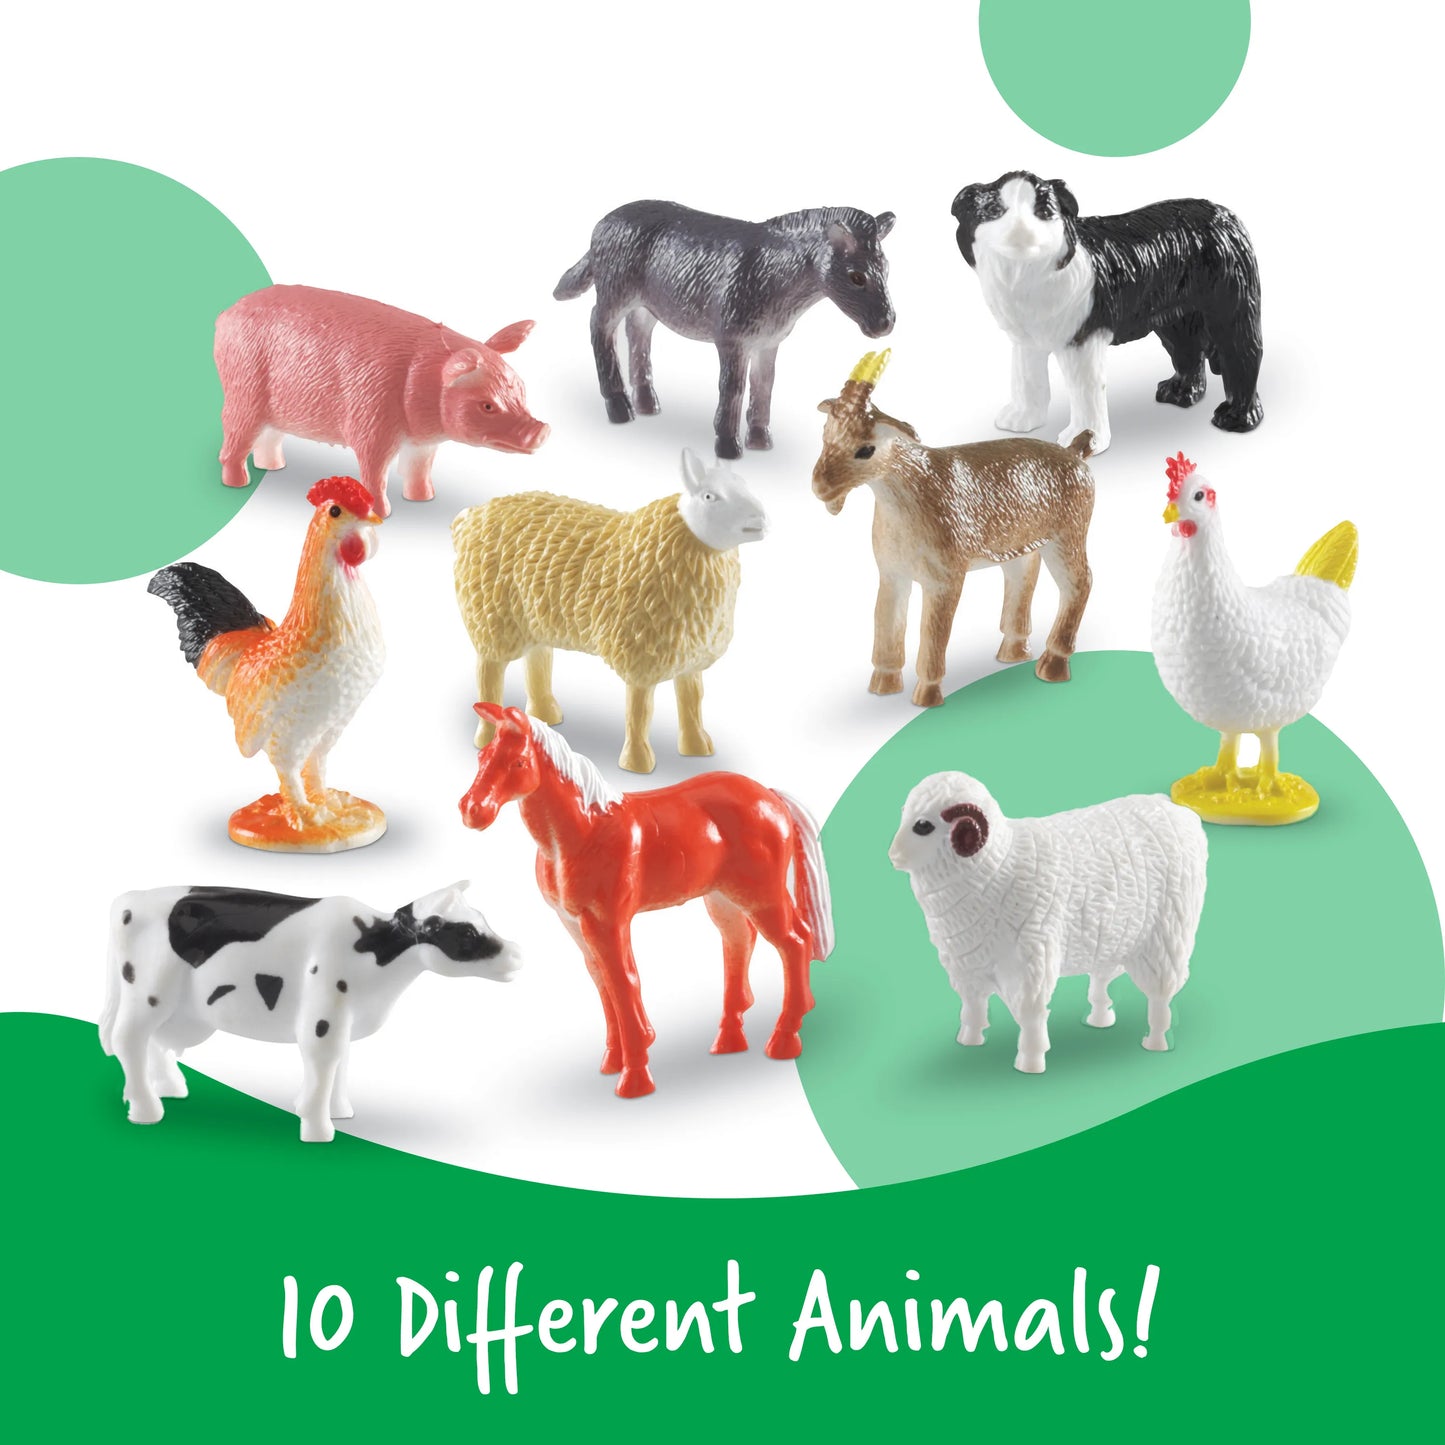 Learning Resources Farm Animal Counters Set of 60